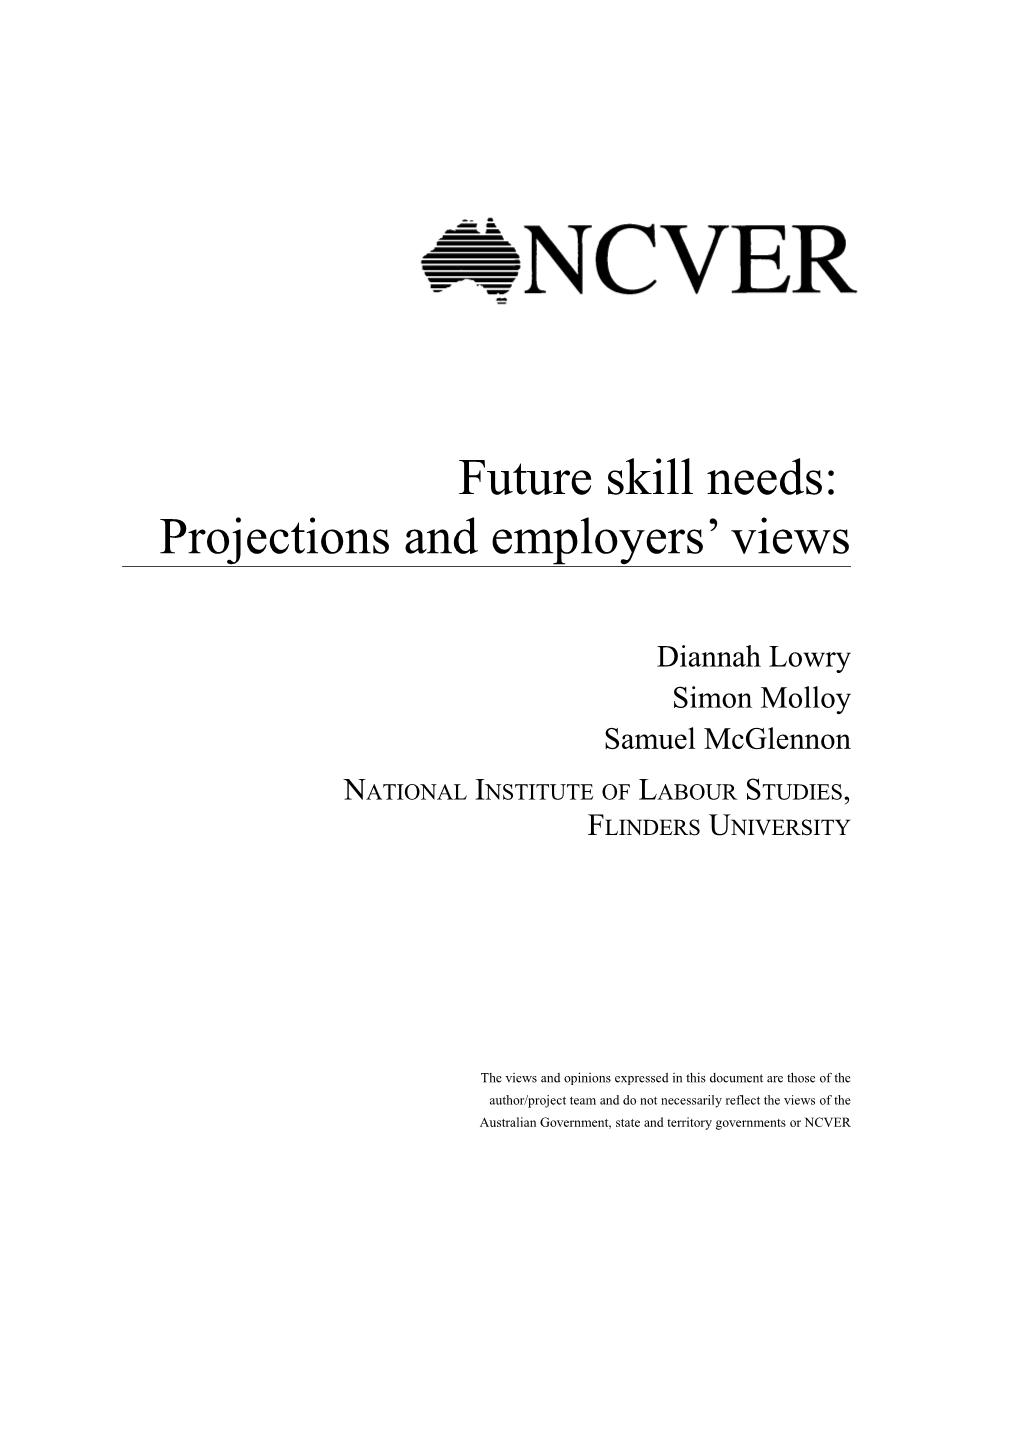 Future Skill Needs: Projections and Employers Views